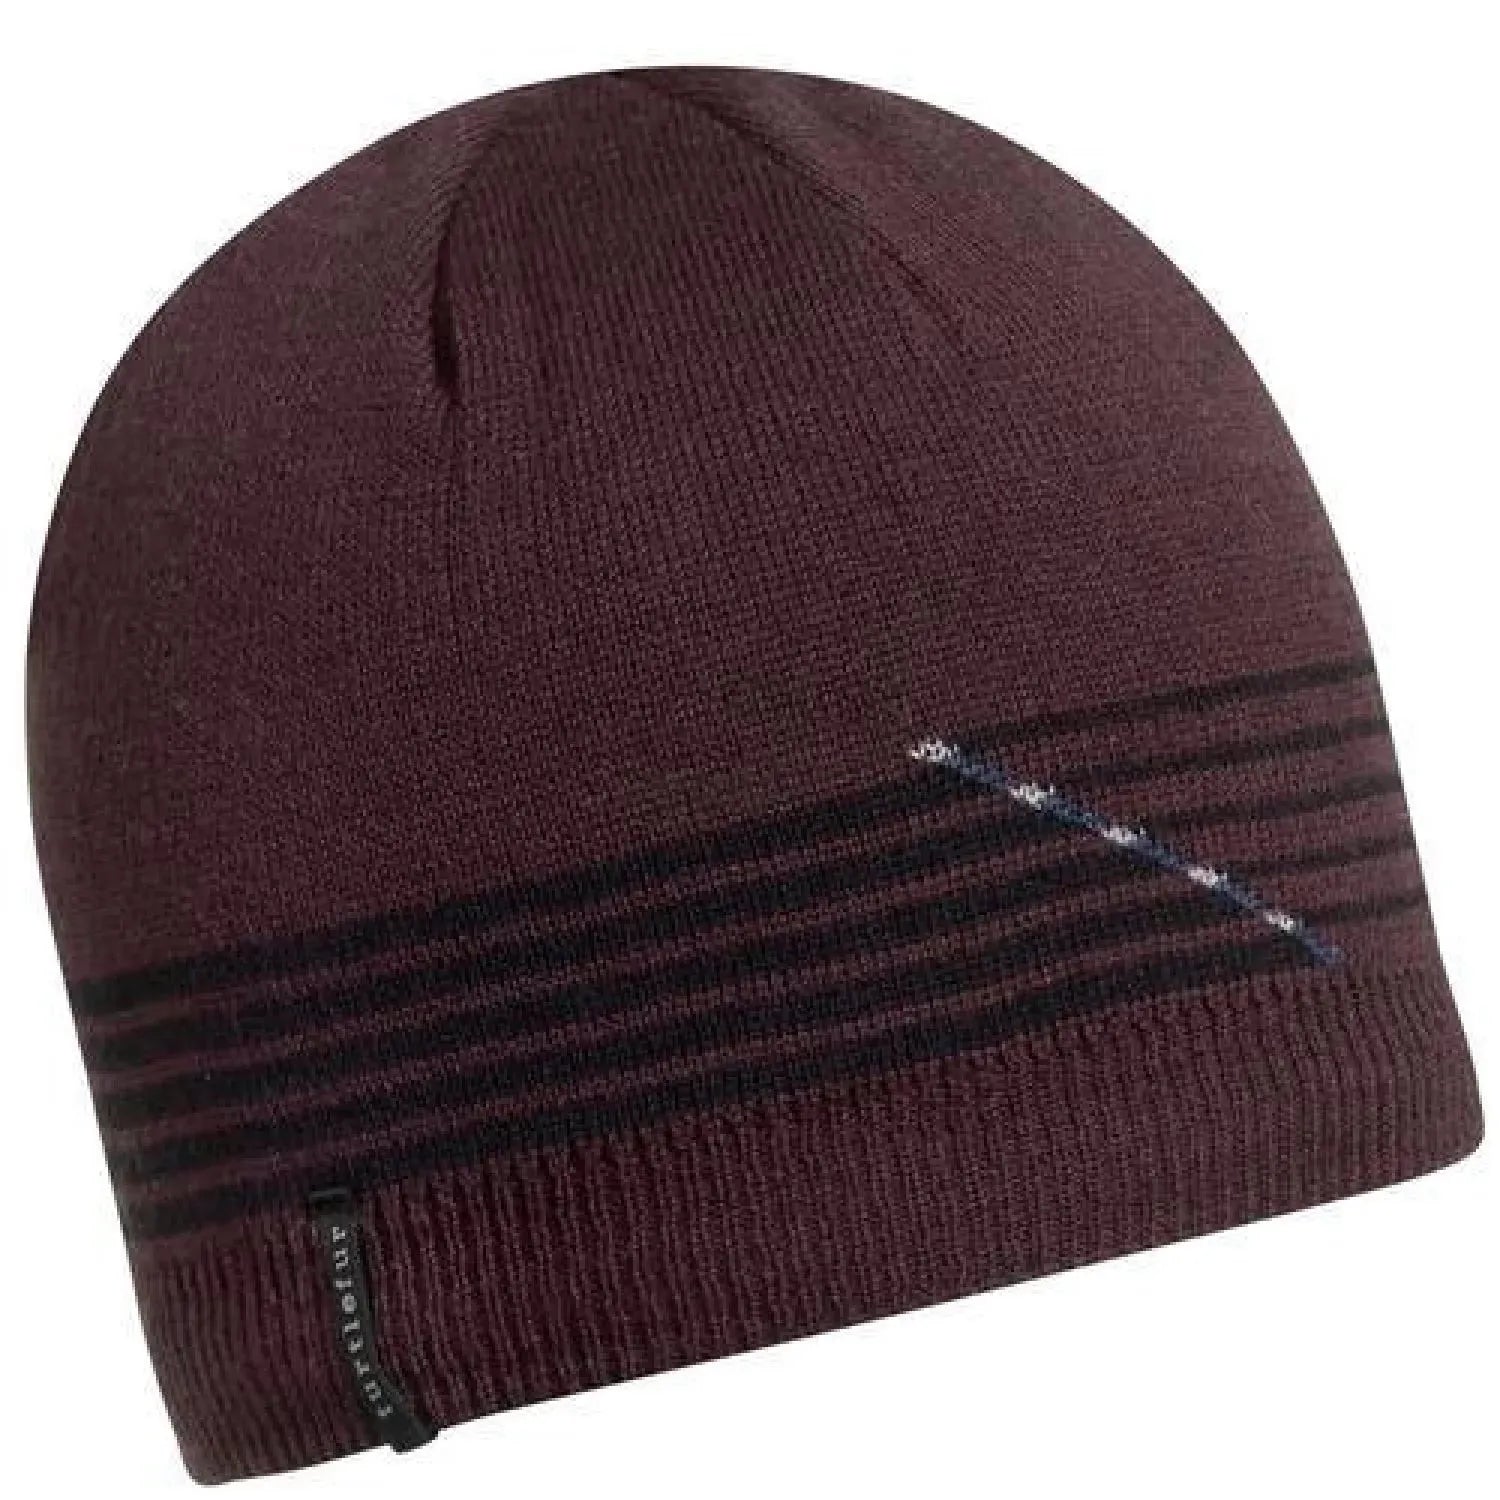 Turtle Fur Seb Beanie shown in the Bark color option. Front flat view.